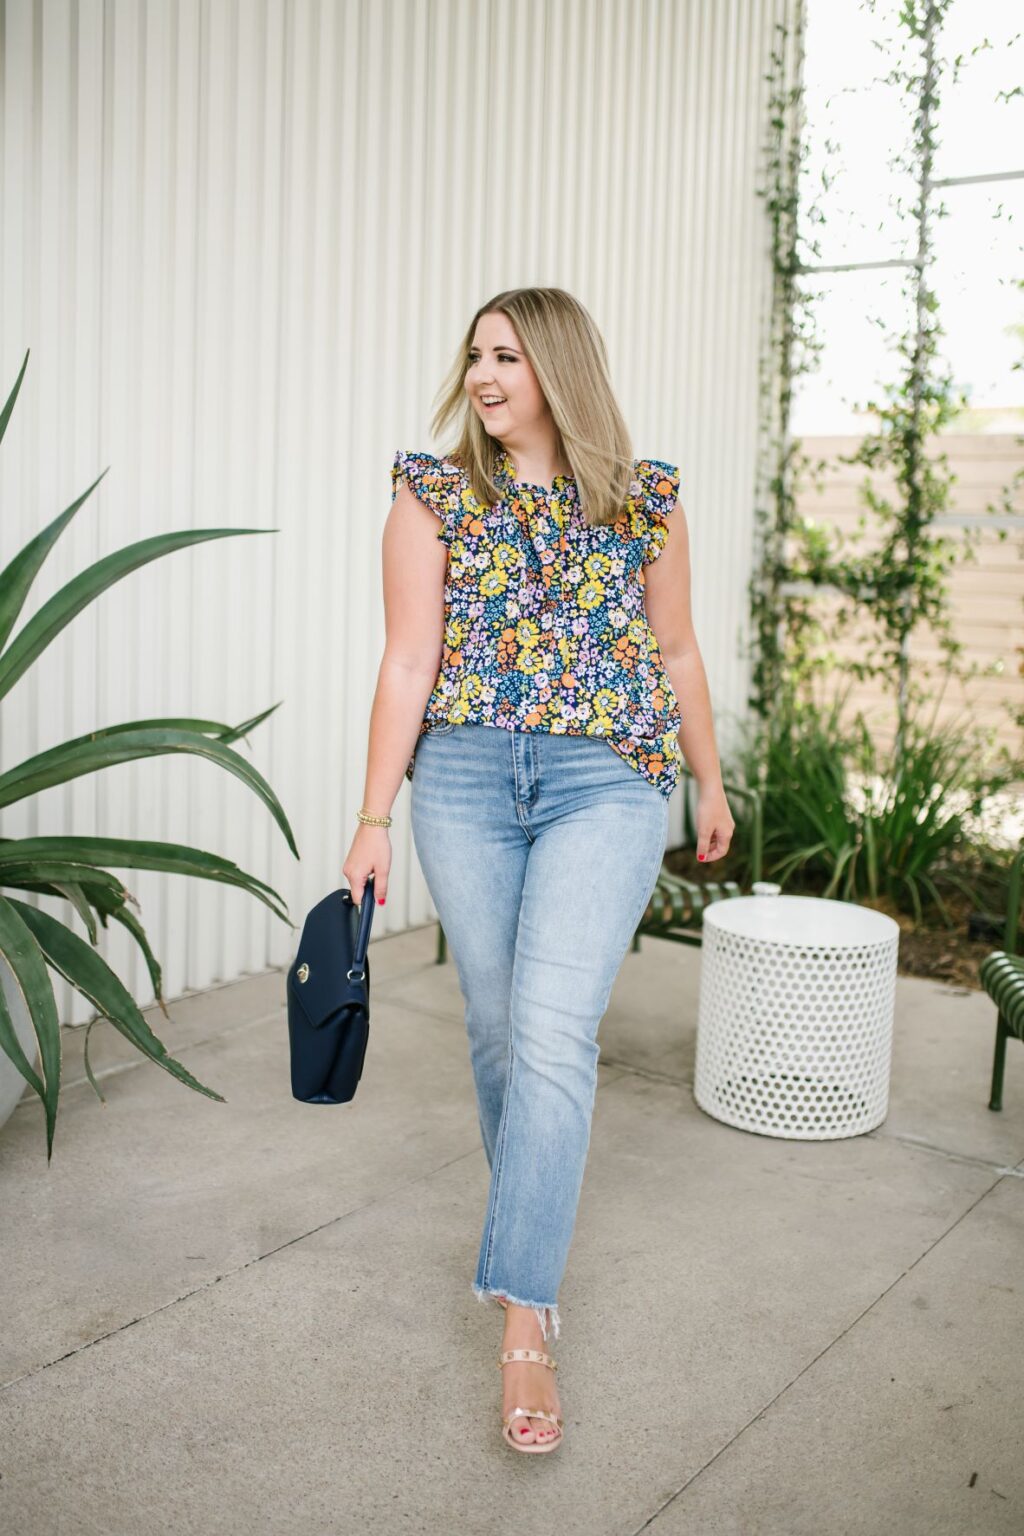 New Boutique Alert: Shop Avara Review - Thrifty Pineapple